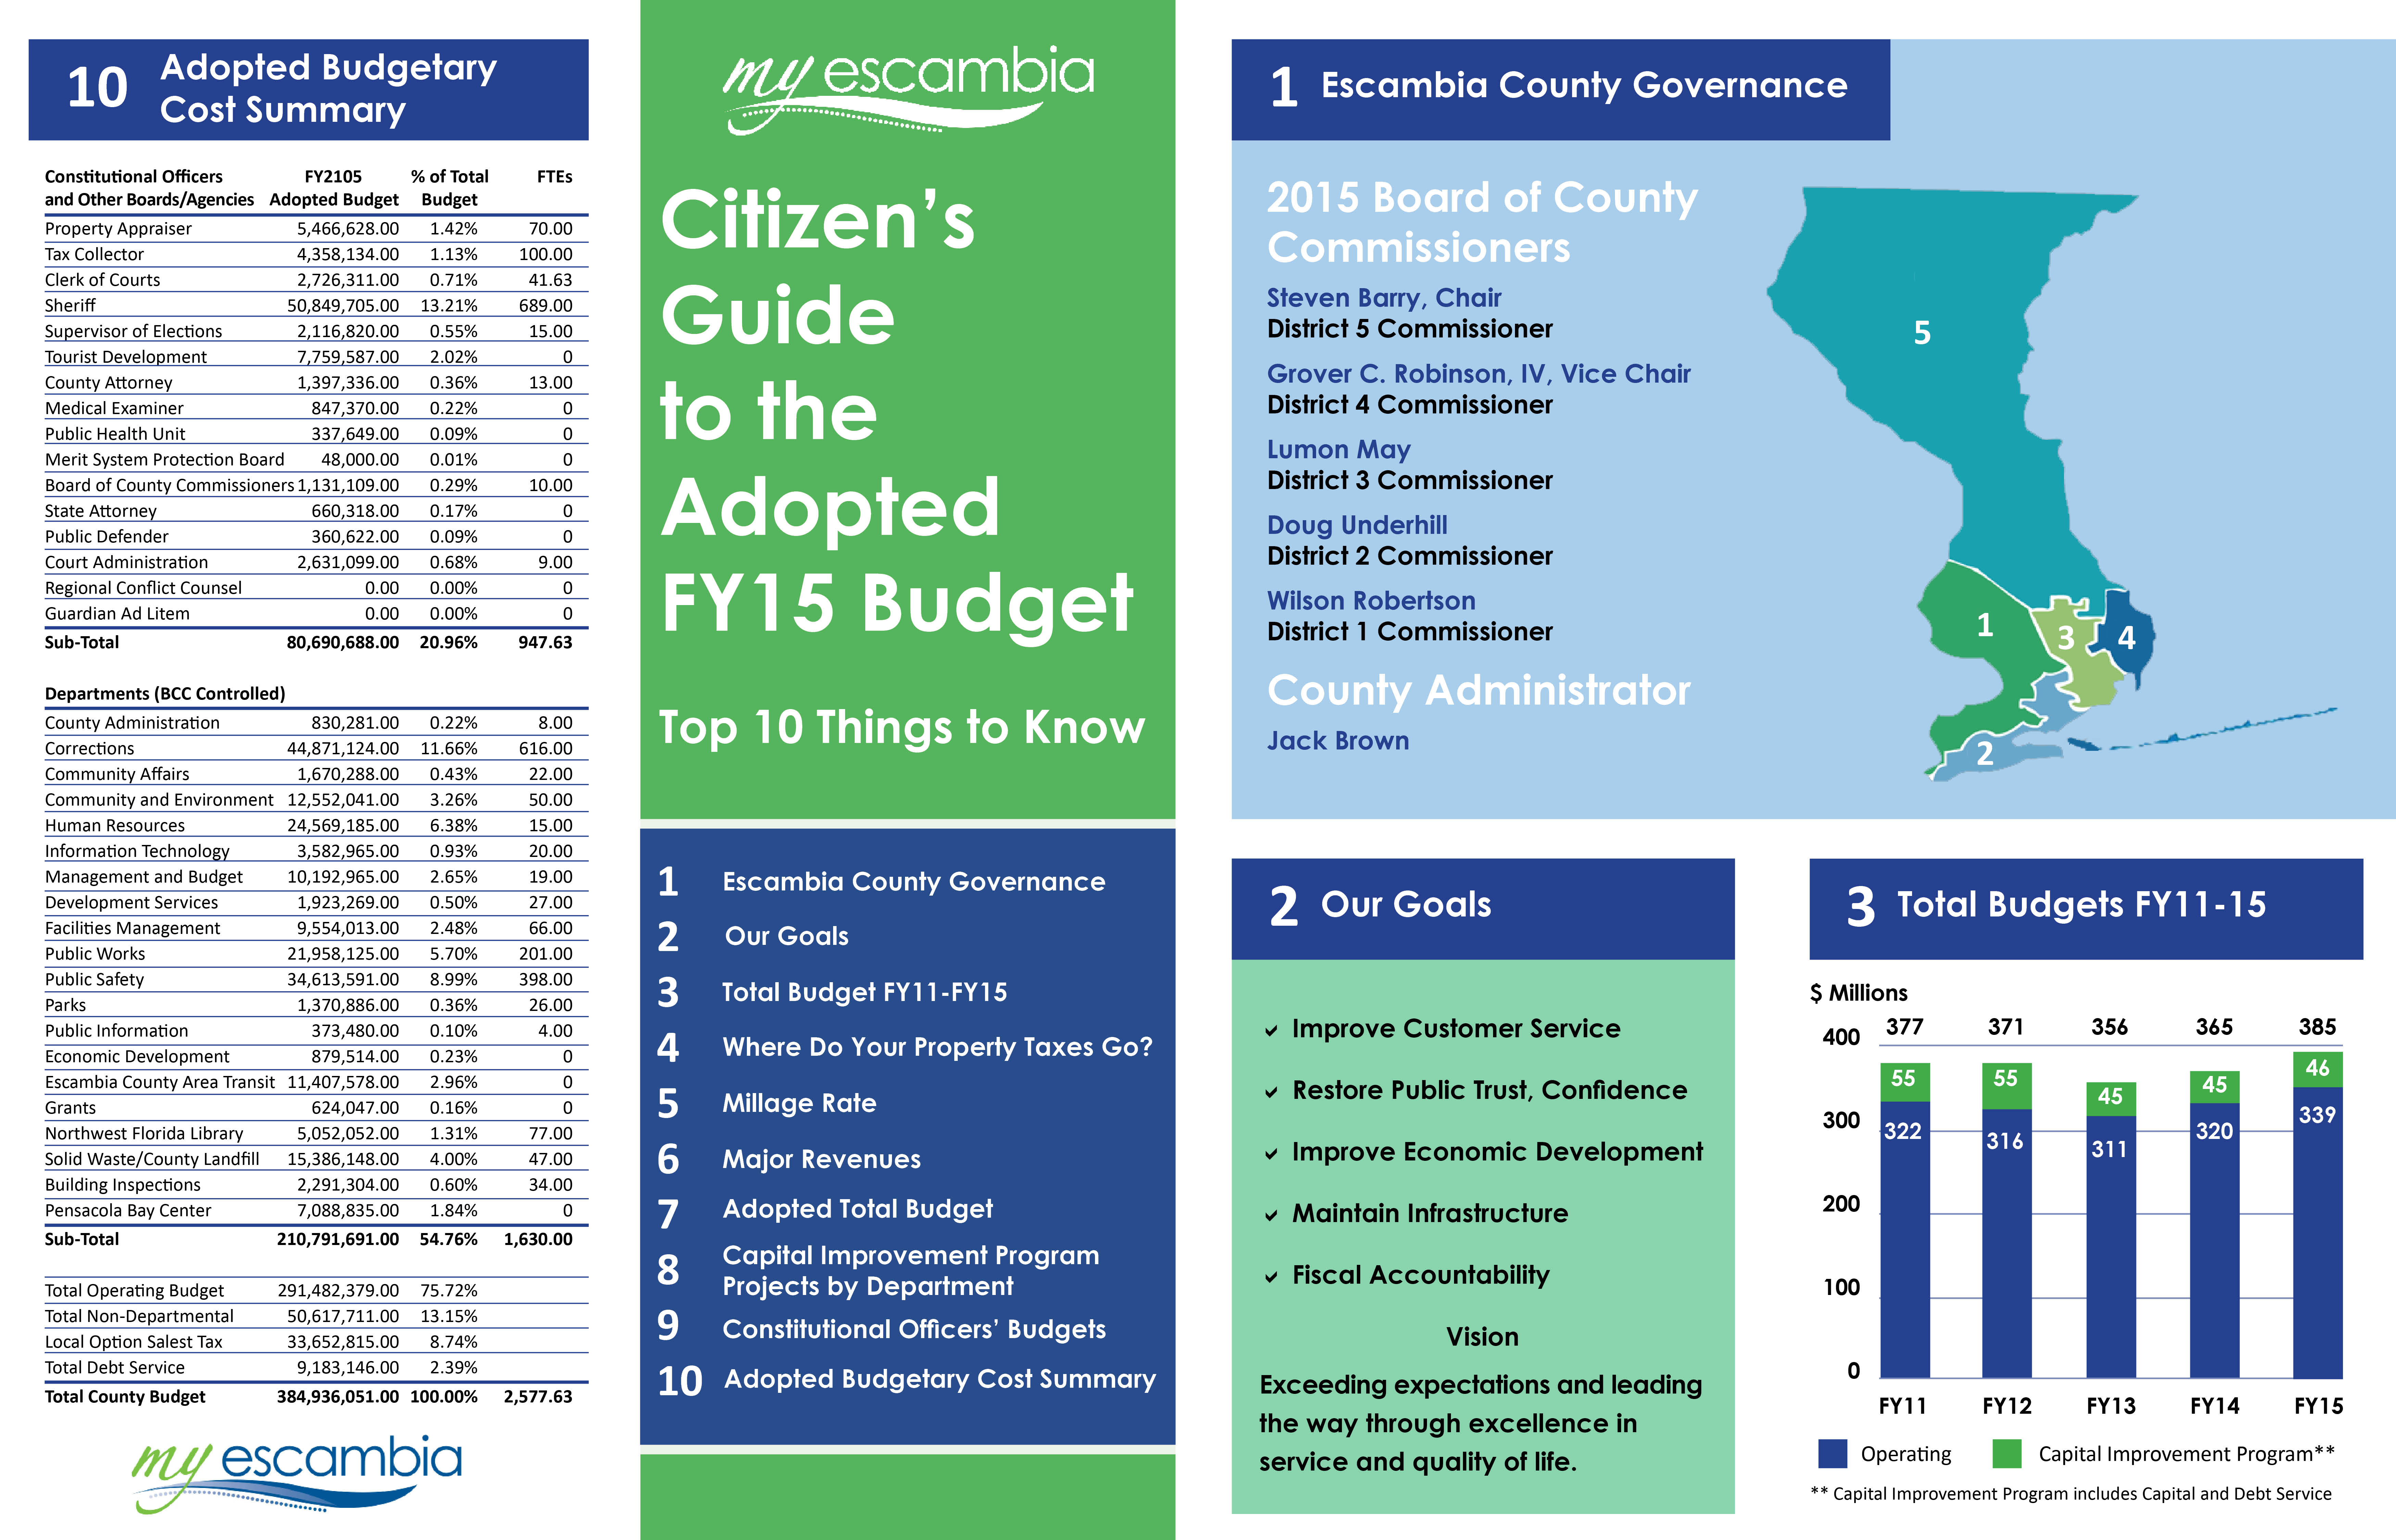 2015 Citizens Guide to the Budget